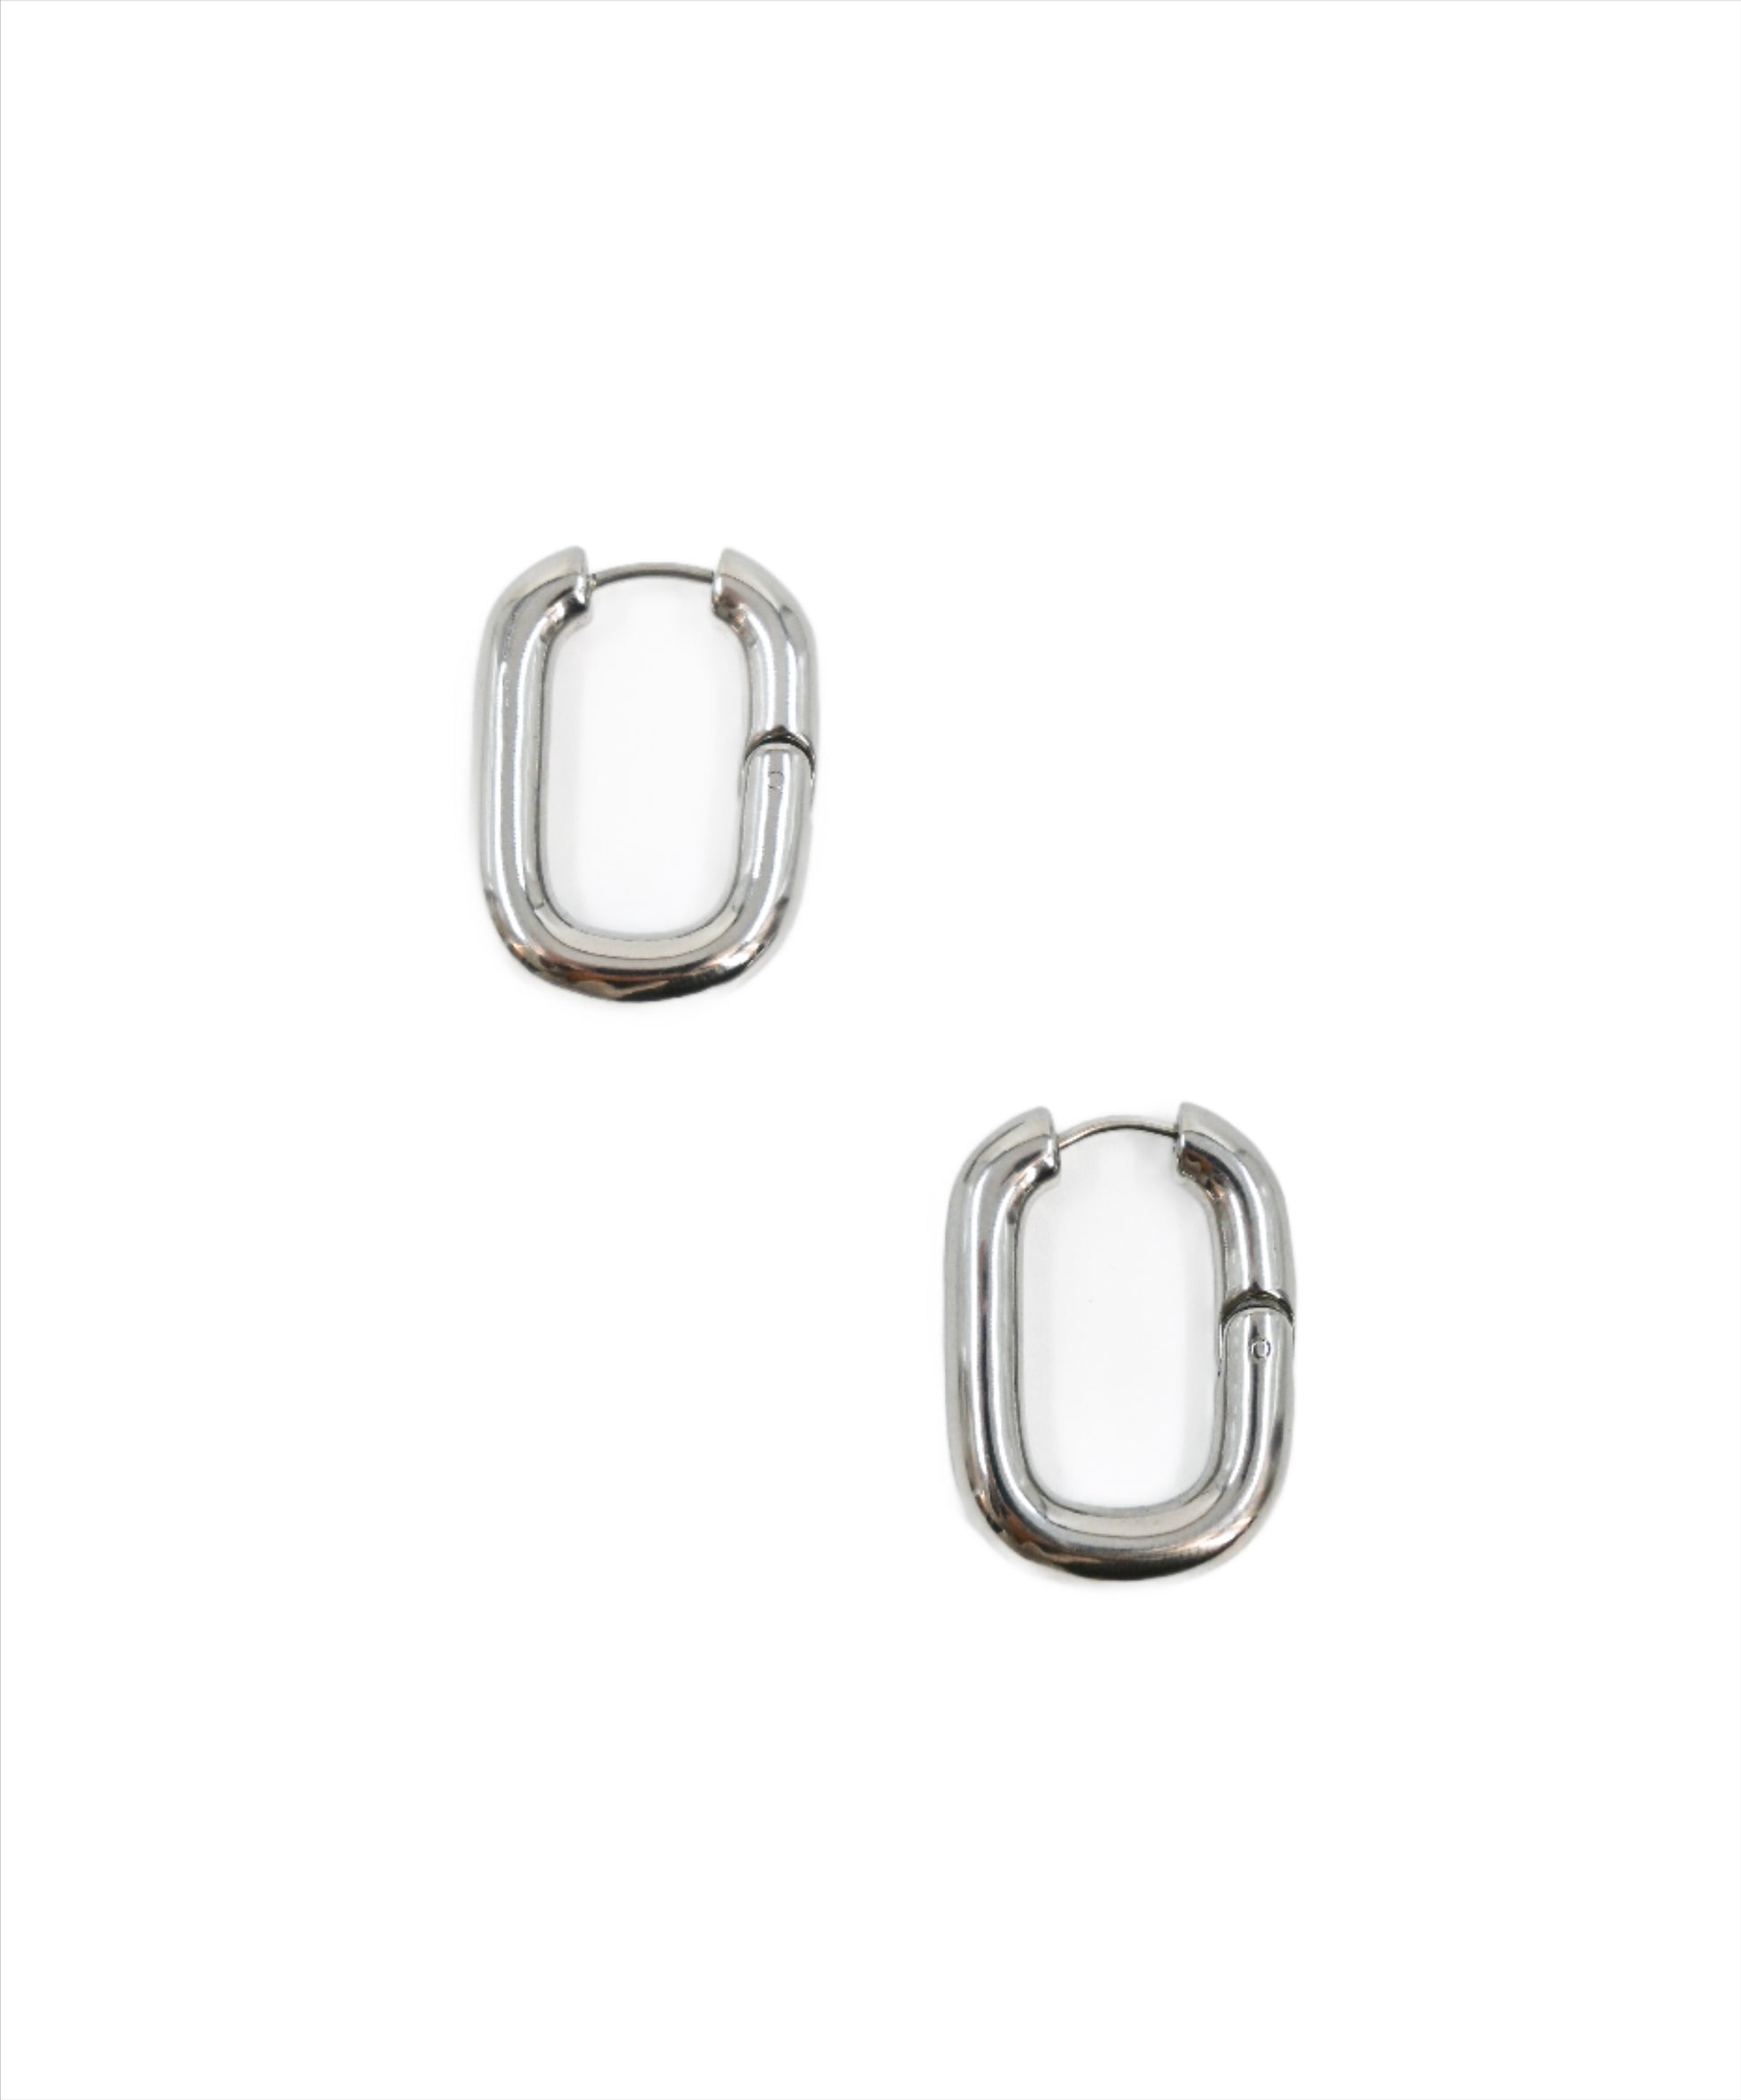 statement large hoops in silver